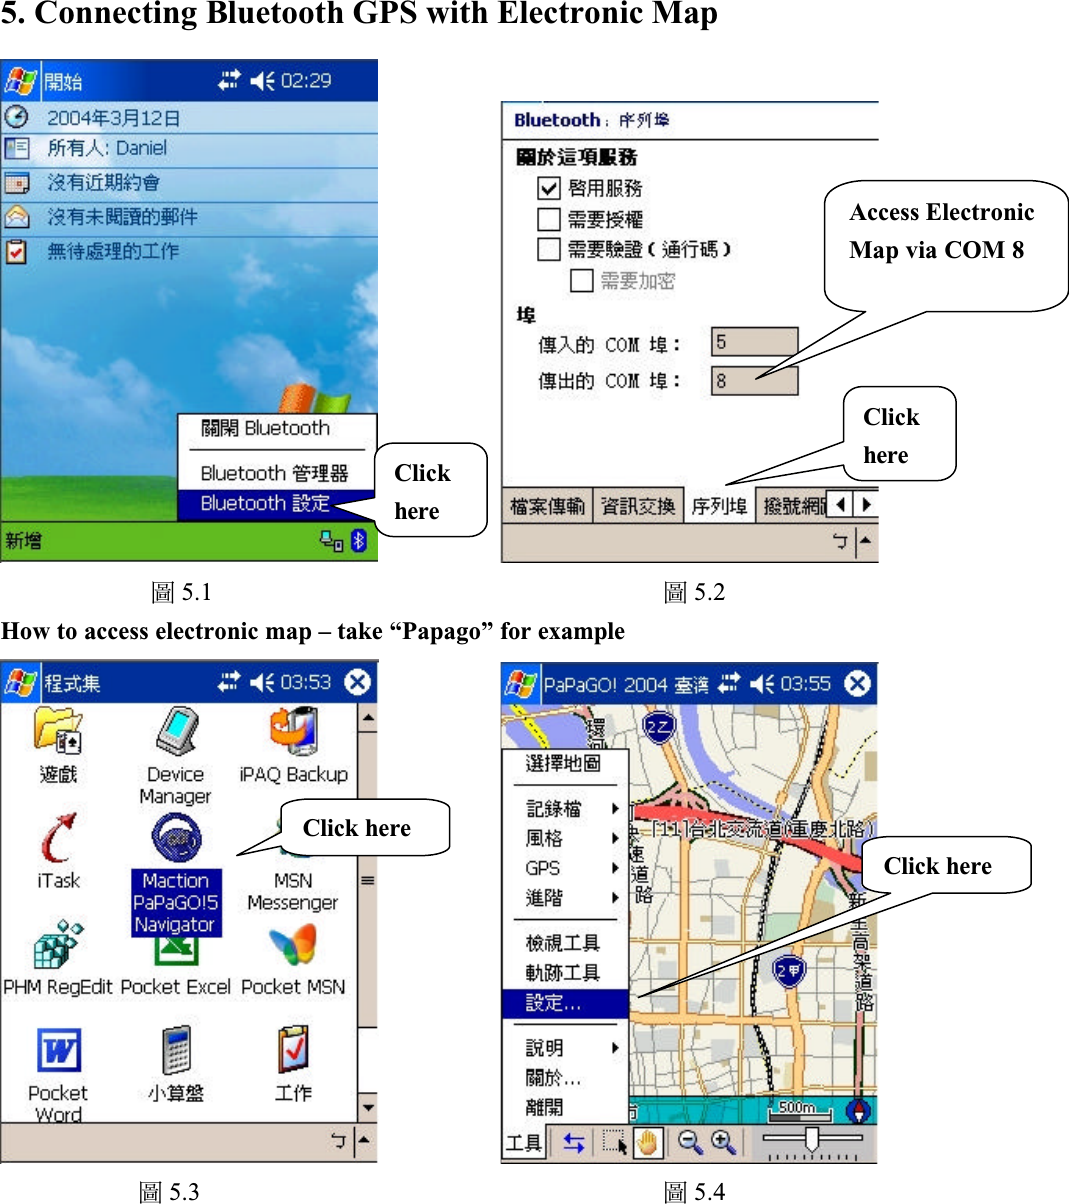 5. Connecting Bluetooth GPS with Electronic Mapቹ5.1 ቹ5.2How to access electronic map – take “Papago” for exampleቹ5.3 ቹ5.4ClickhereAccess Electronic Map via COM 8ClickhereClick hereClick here